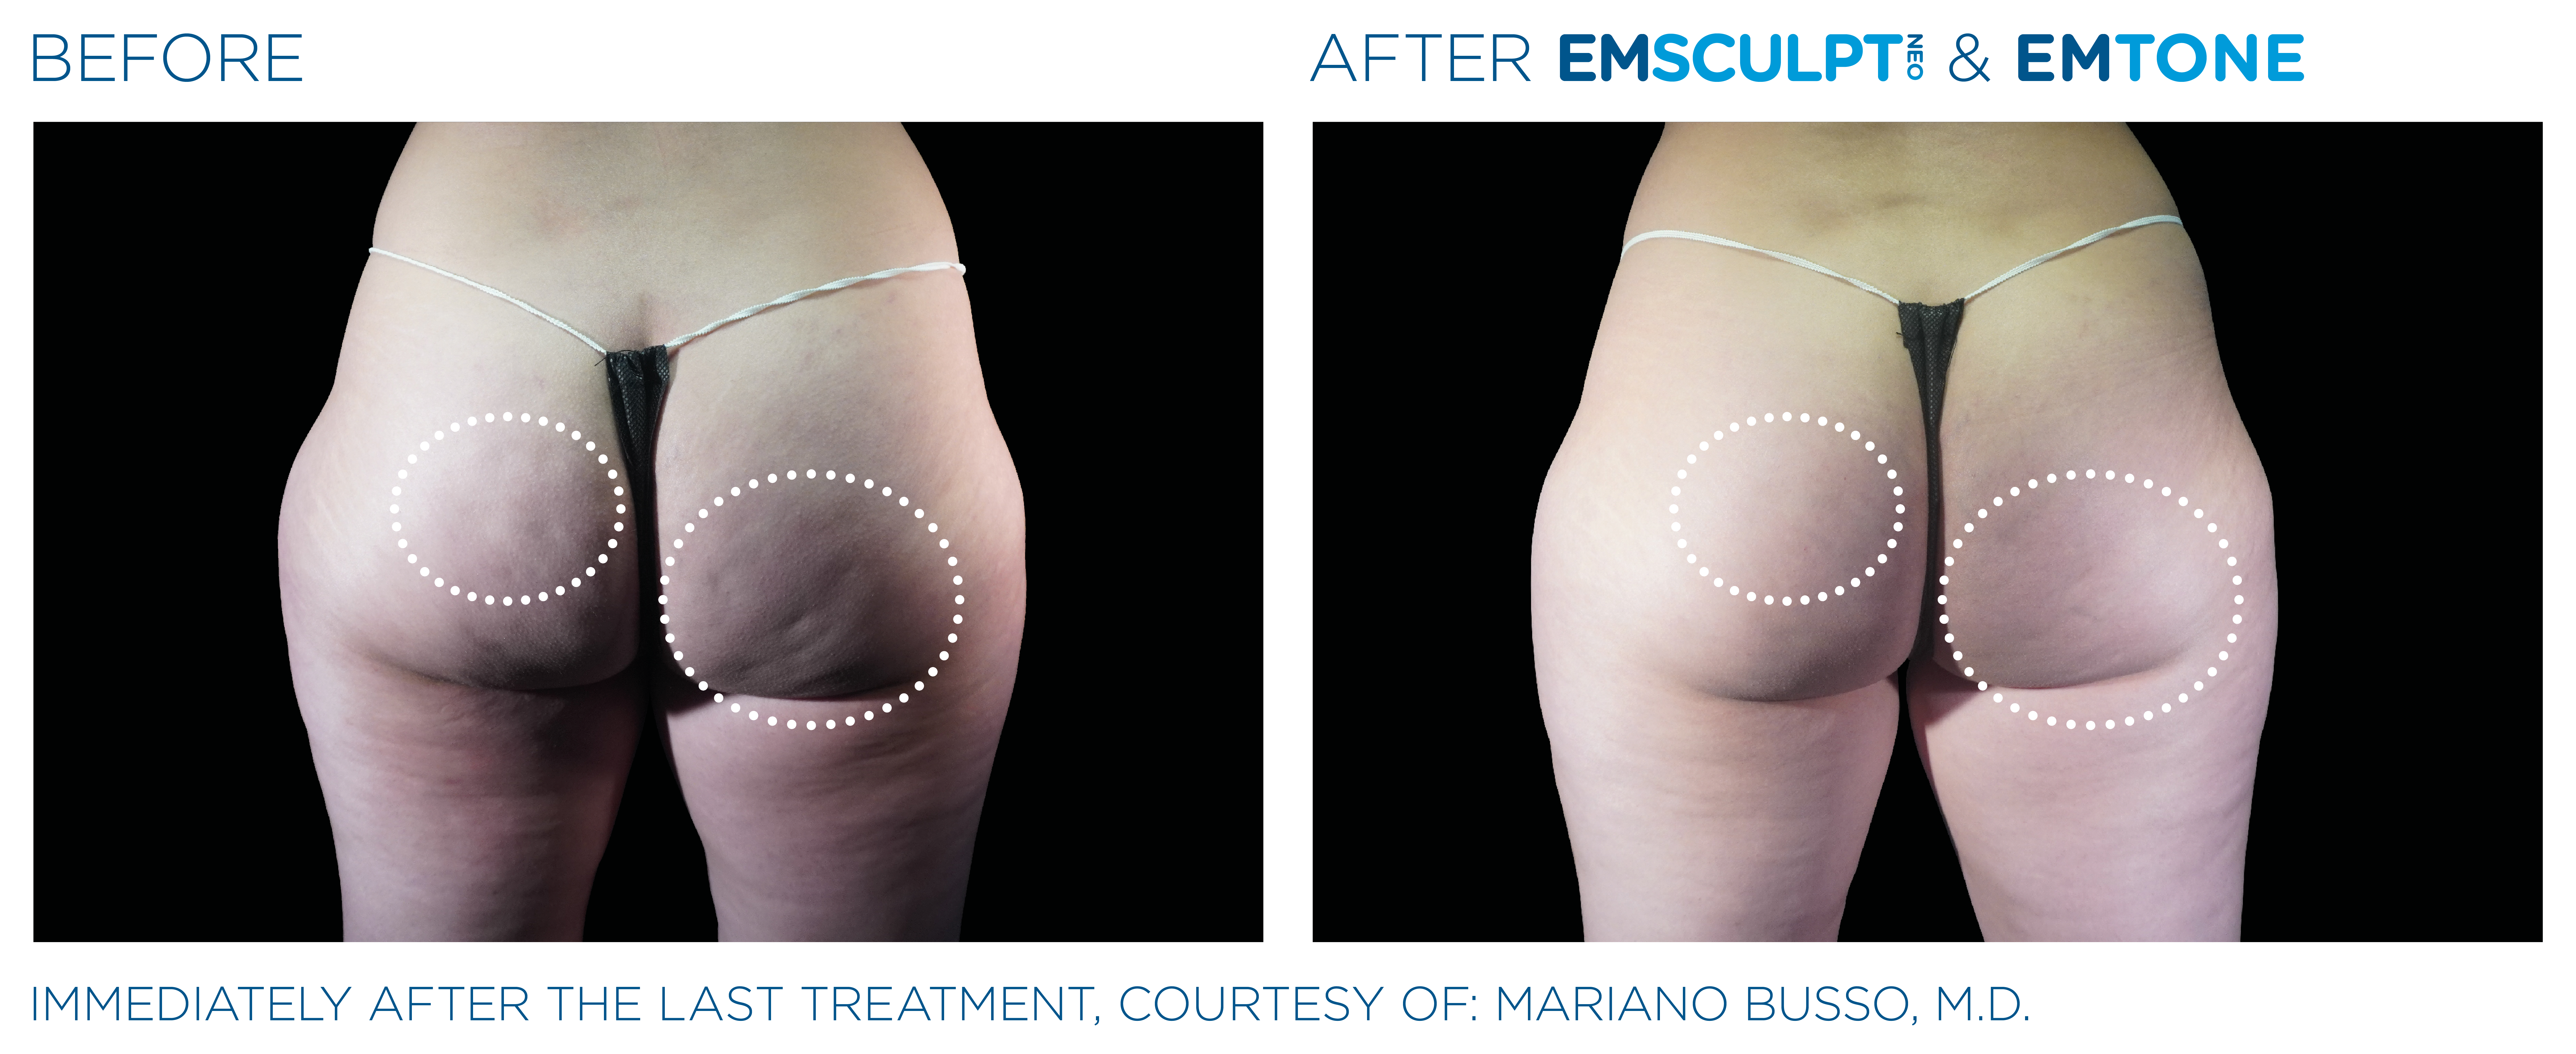 Emsculpt Neo Before and After Buttocks